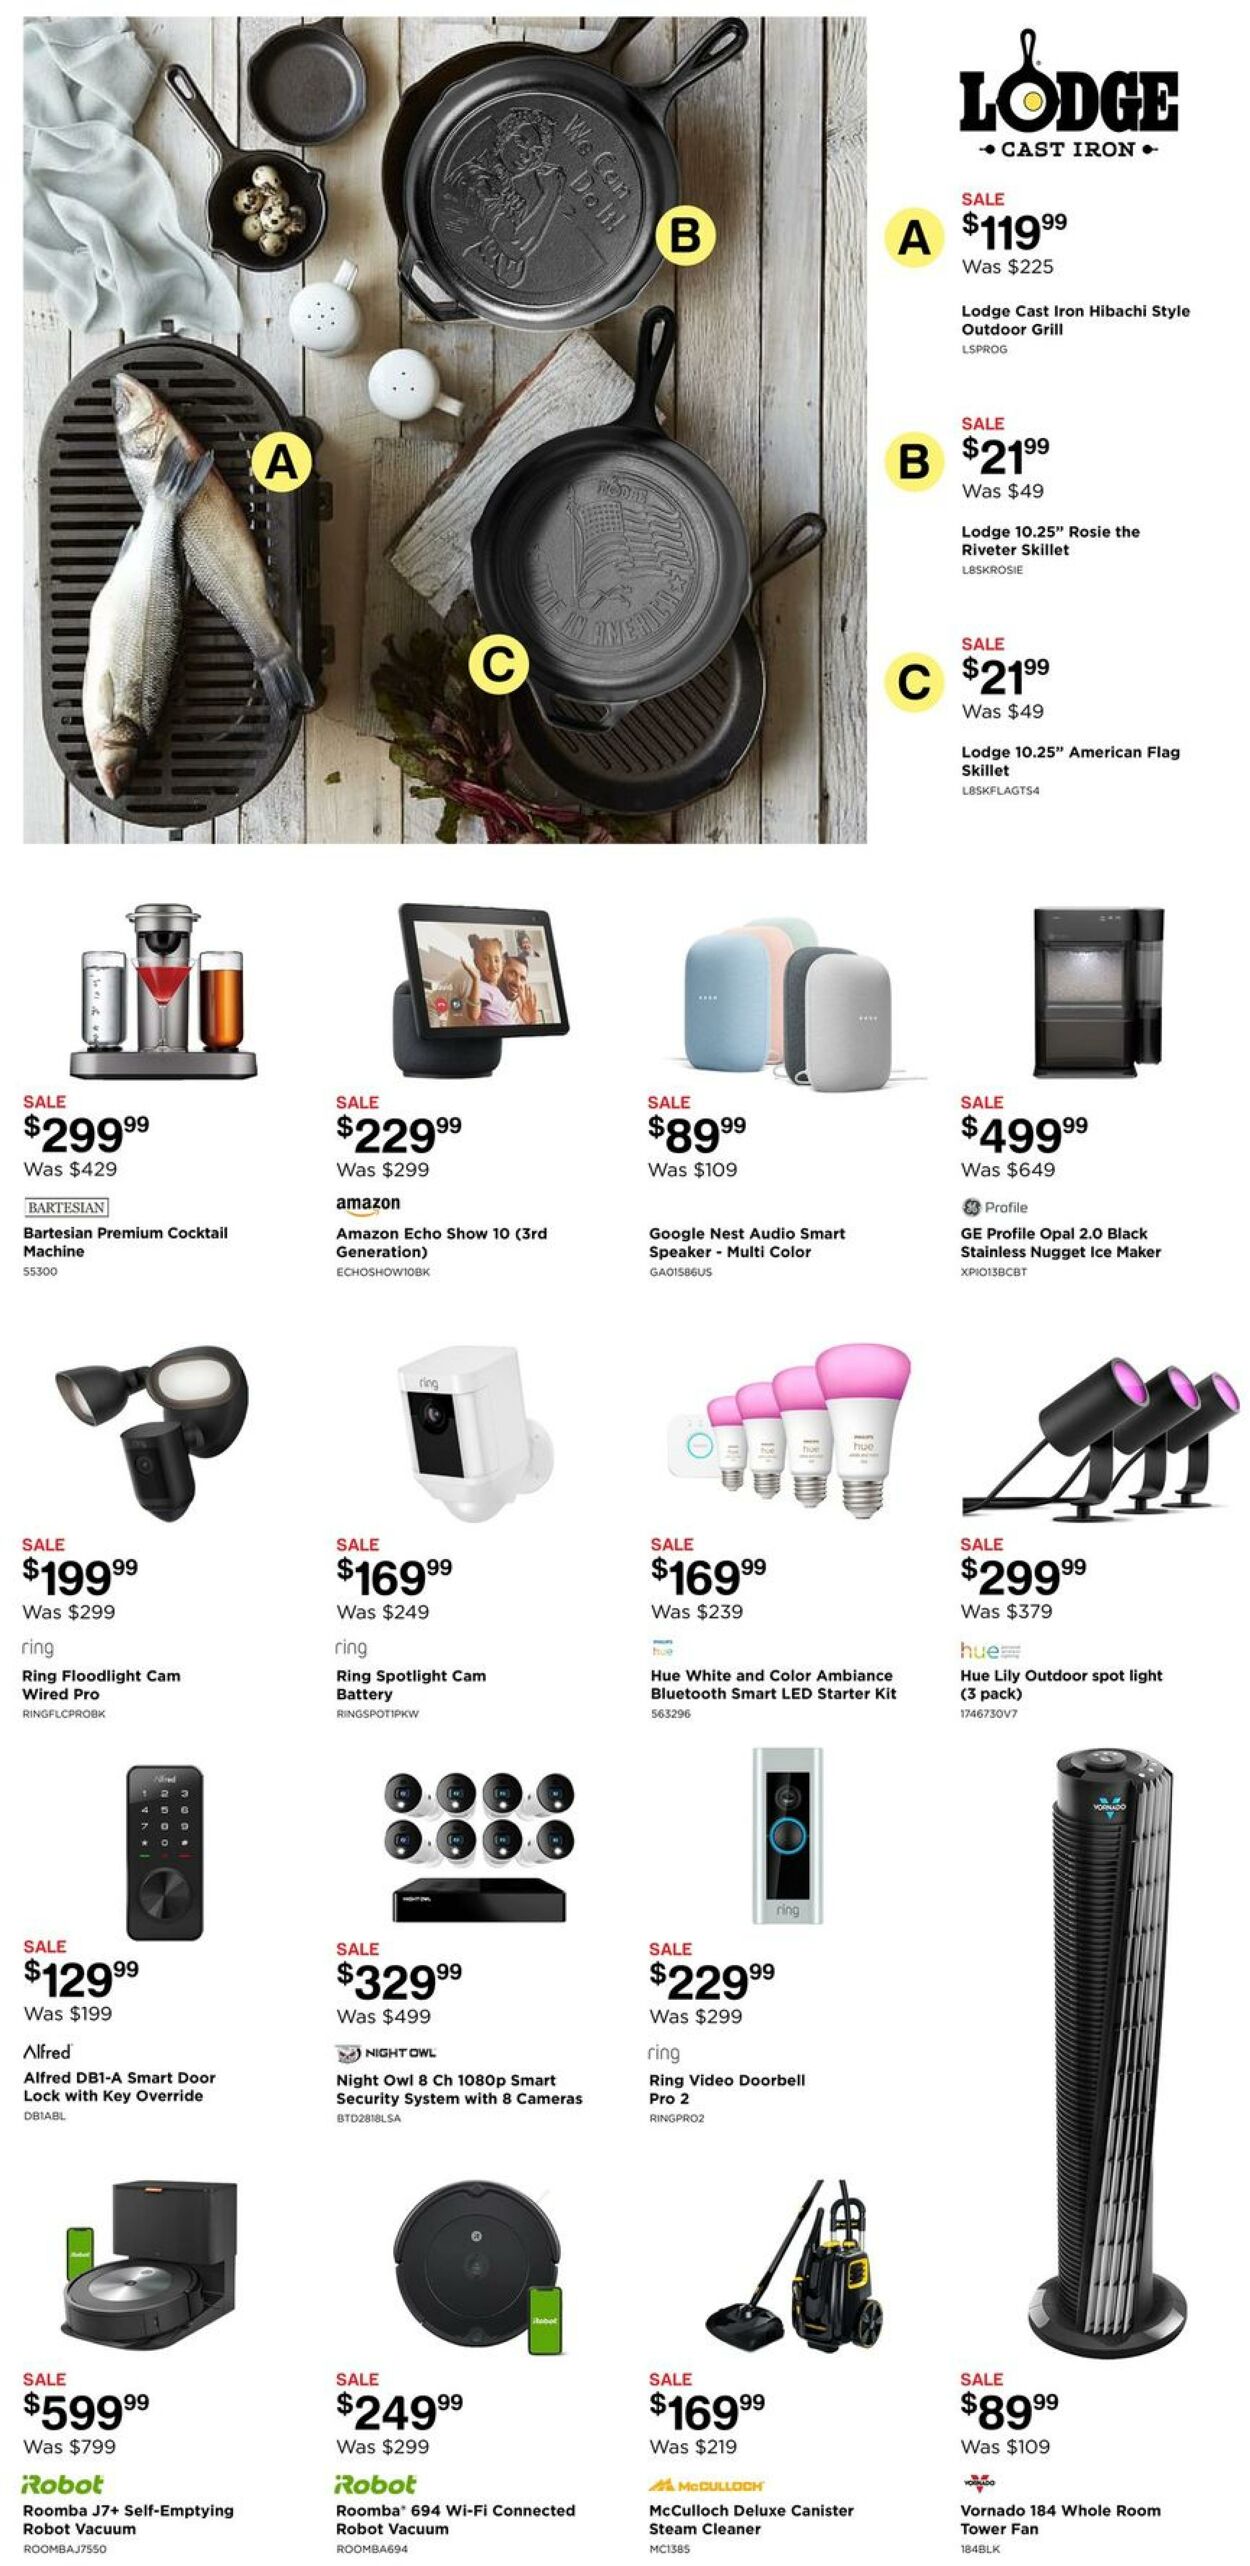 Weekly ad Electronic Express 06/26/2022 - 07/02/2022